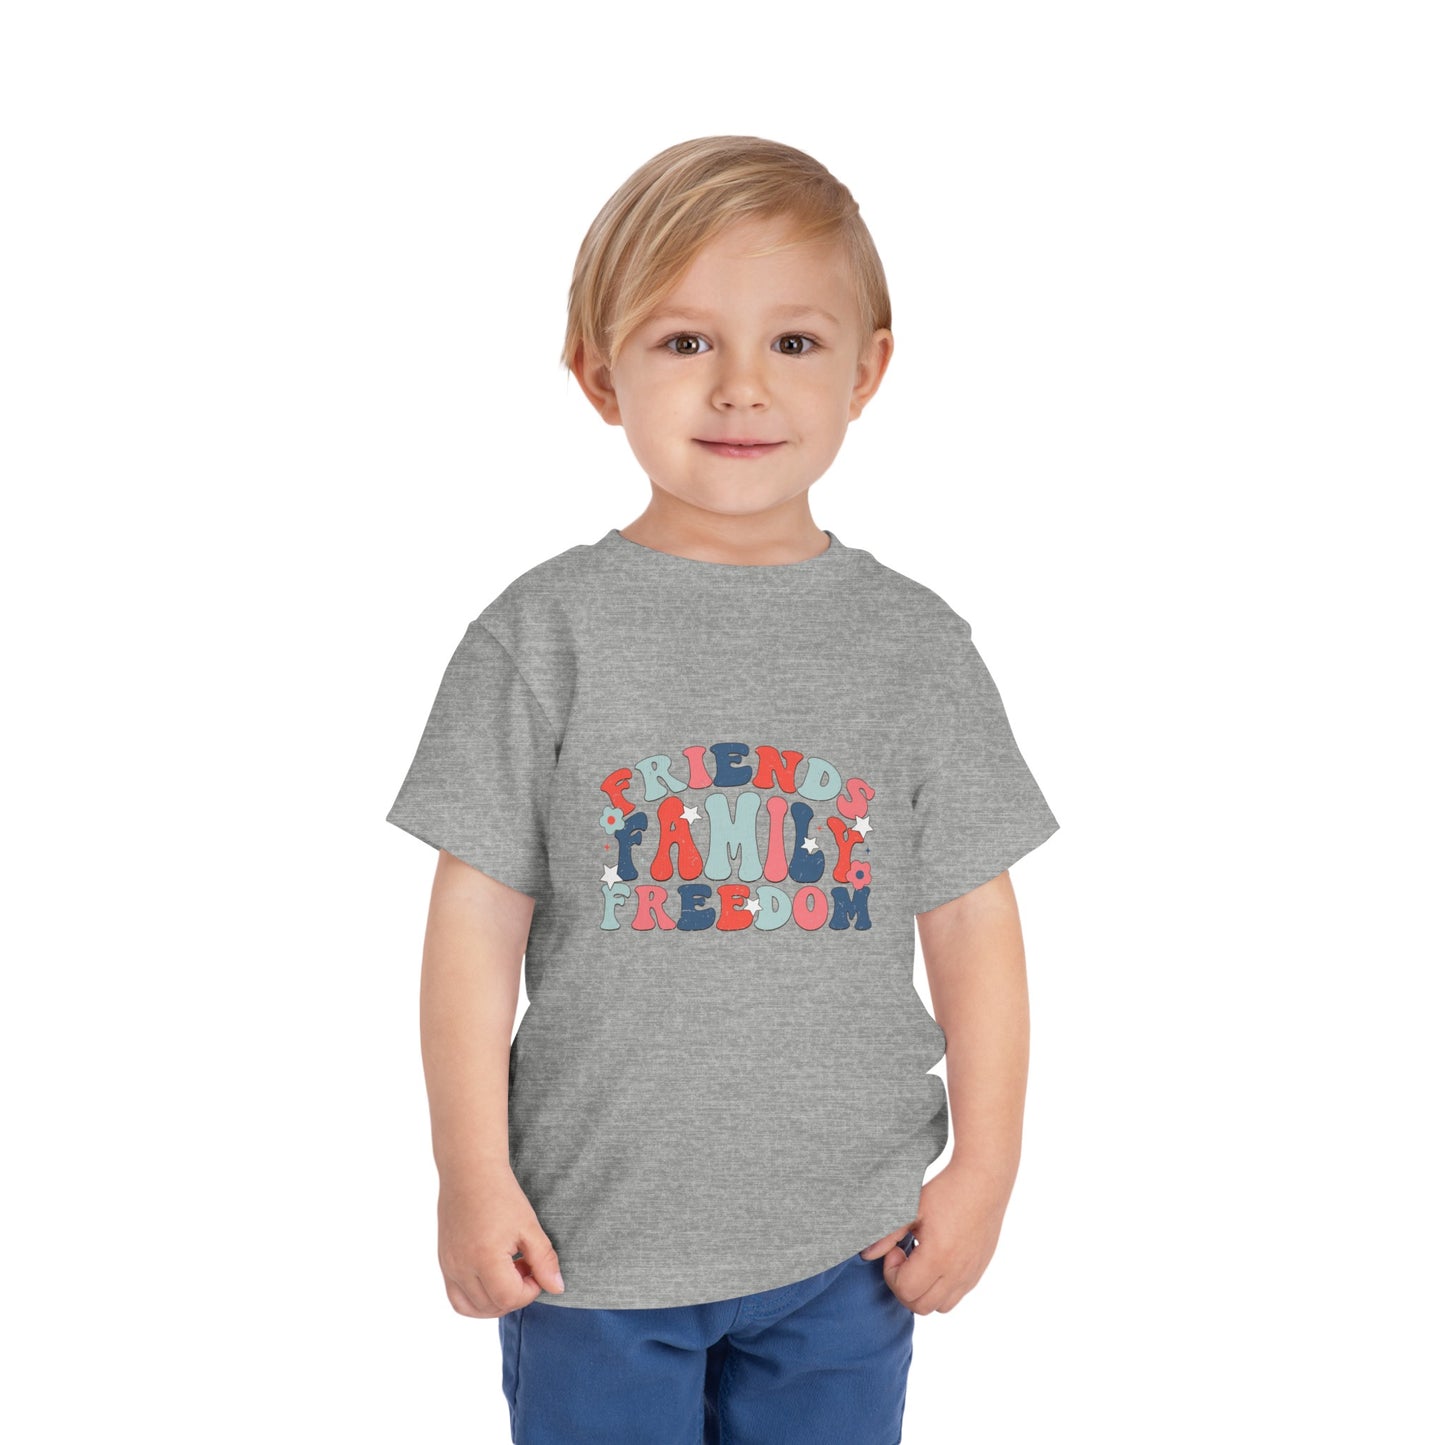 Friends Family & Freedom Patriotic 4th of July Toddler Short Sleeve Tee